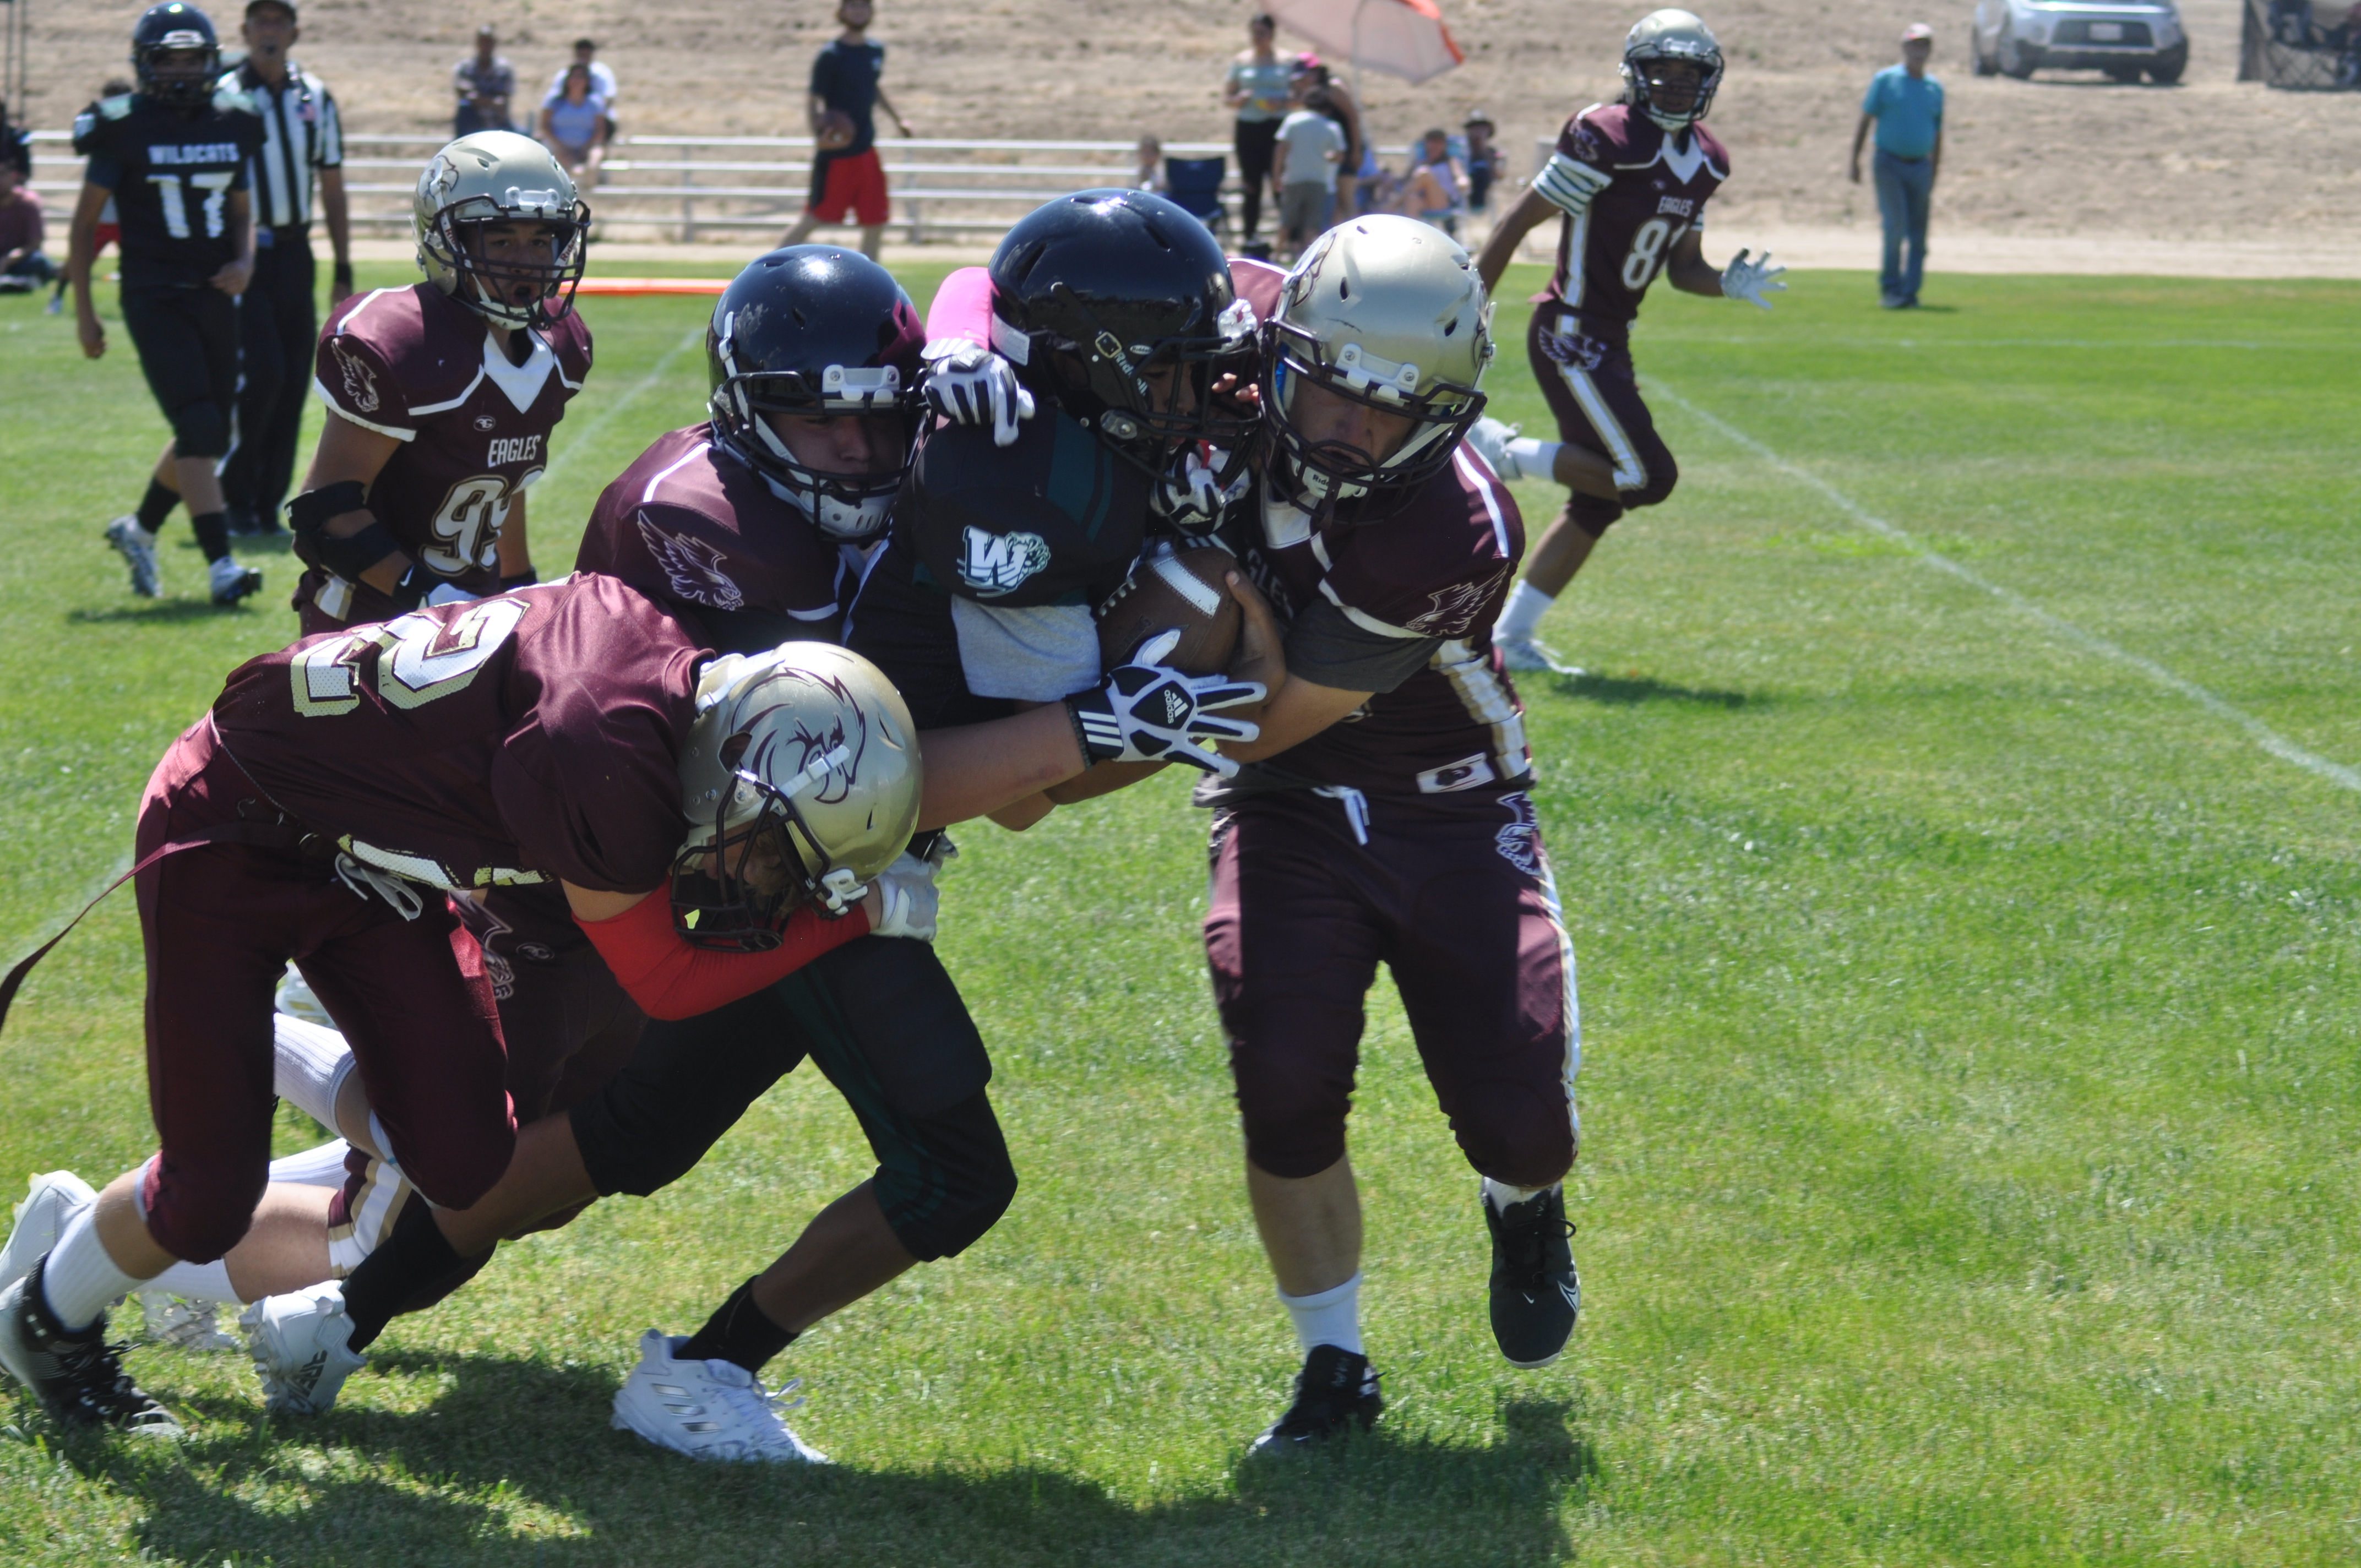 Julian High football players tackle the opposition.